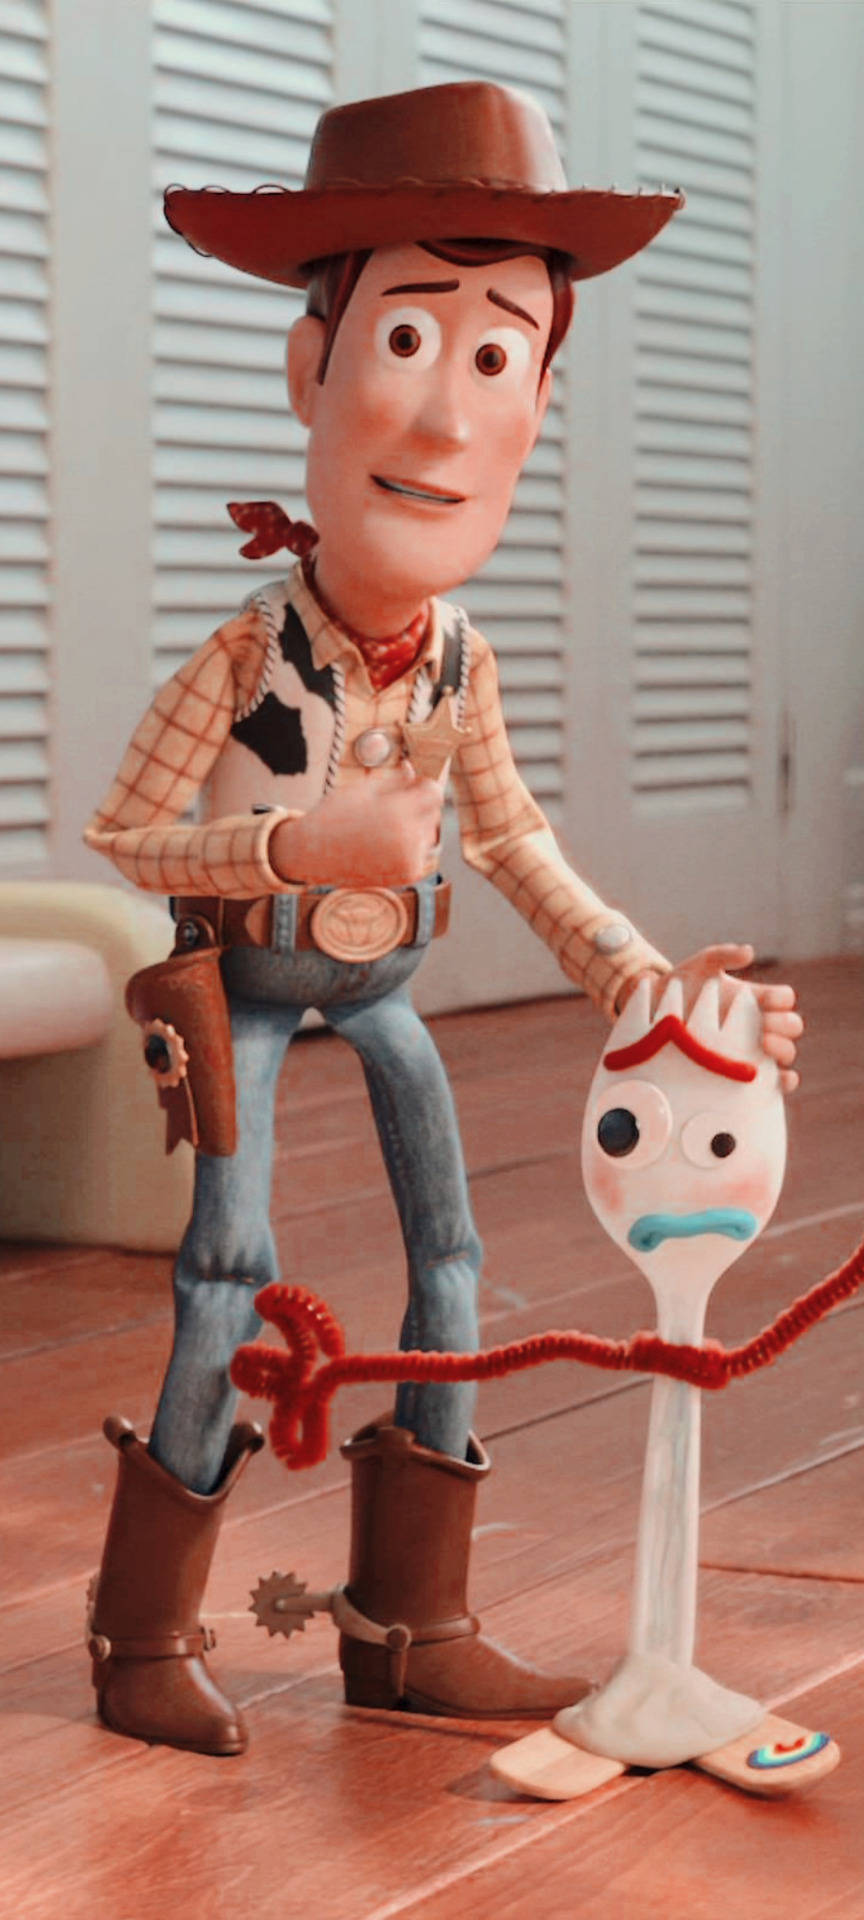 Introducing Toy Story Forky